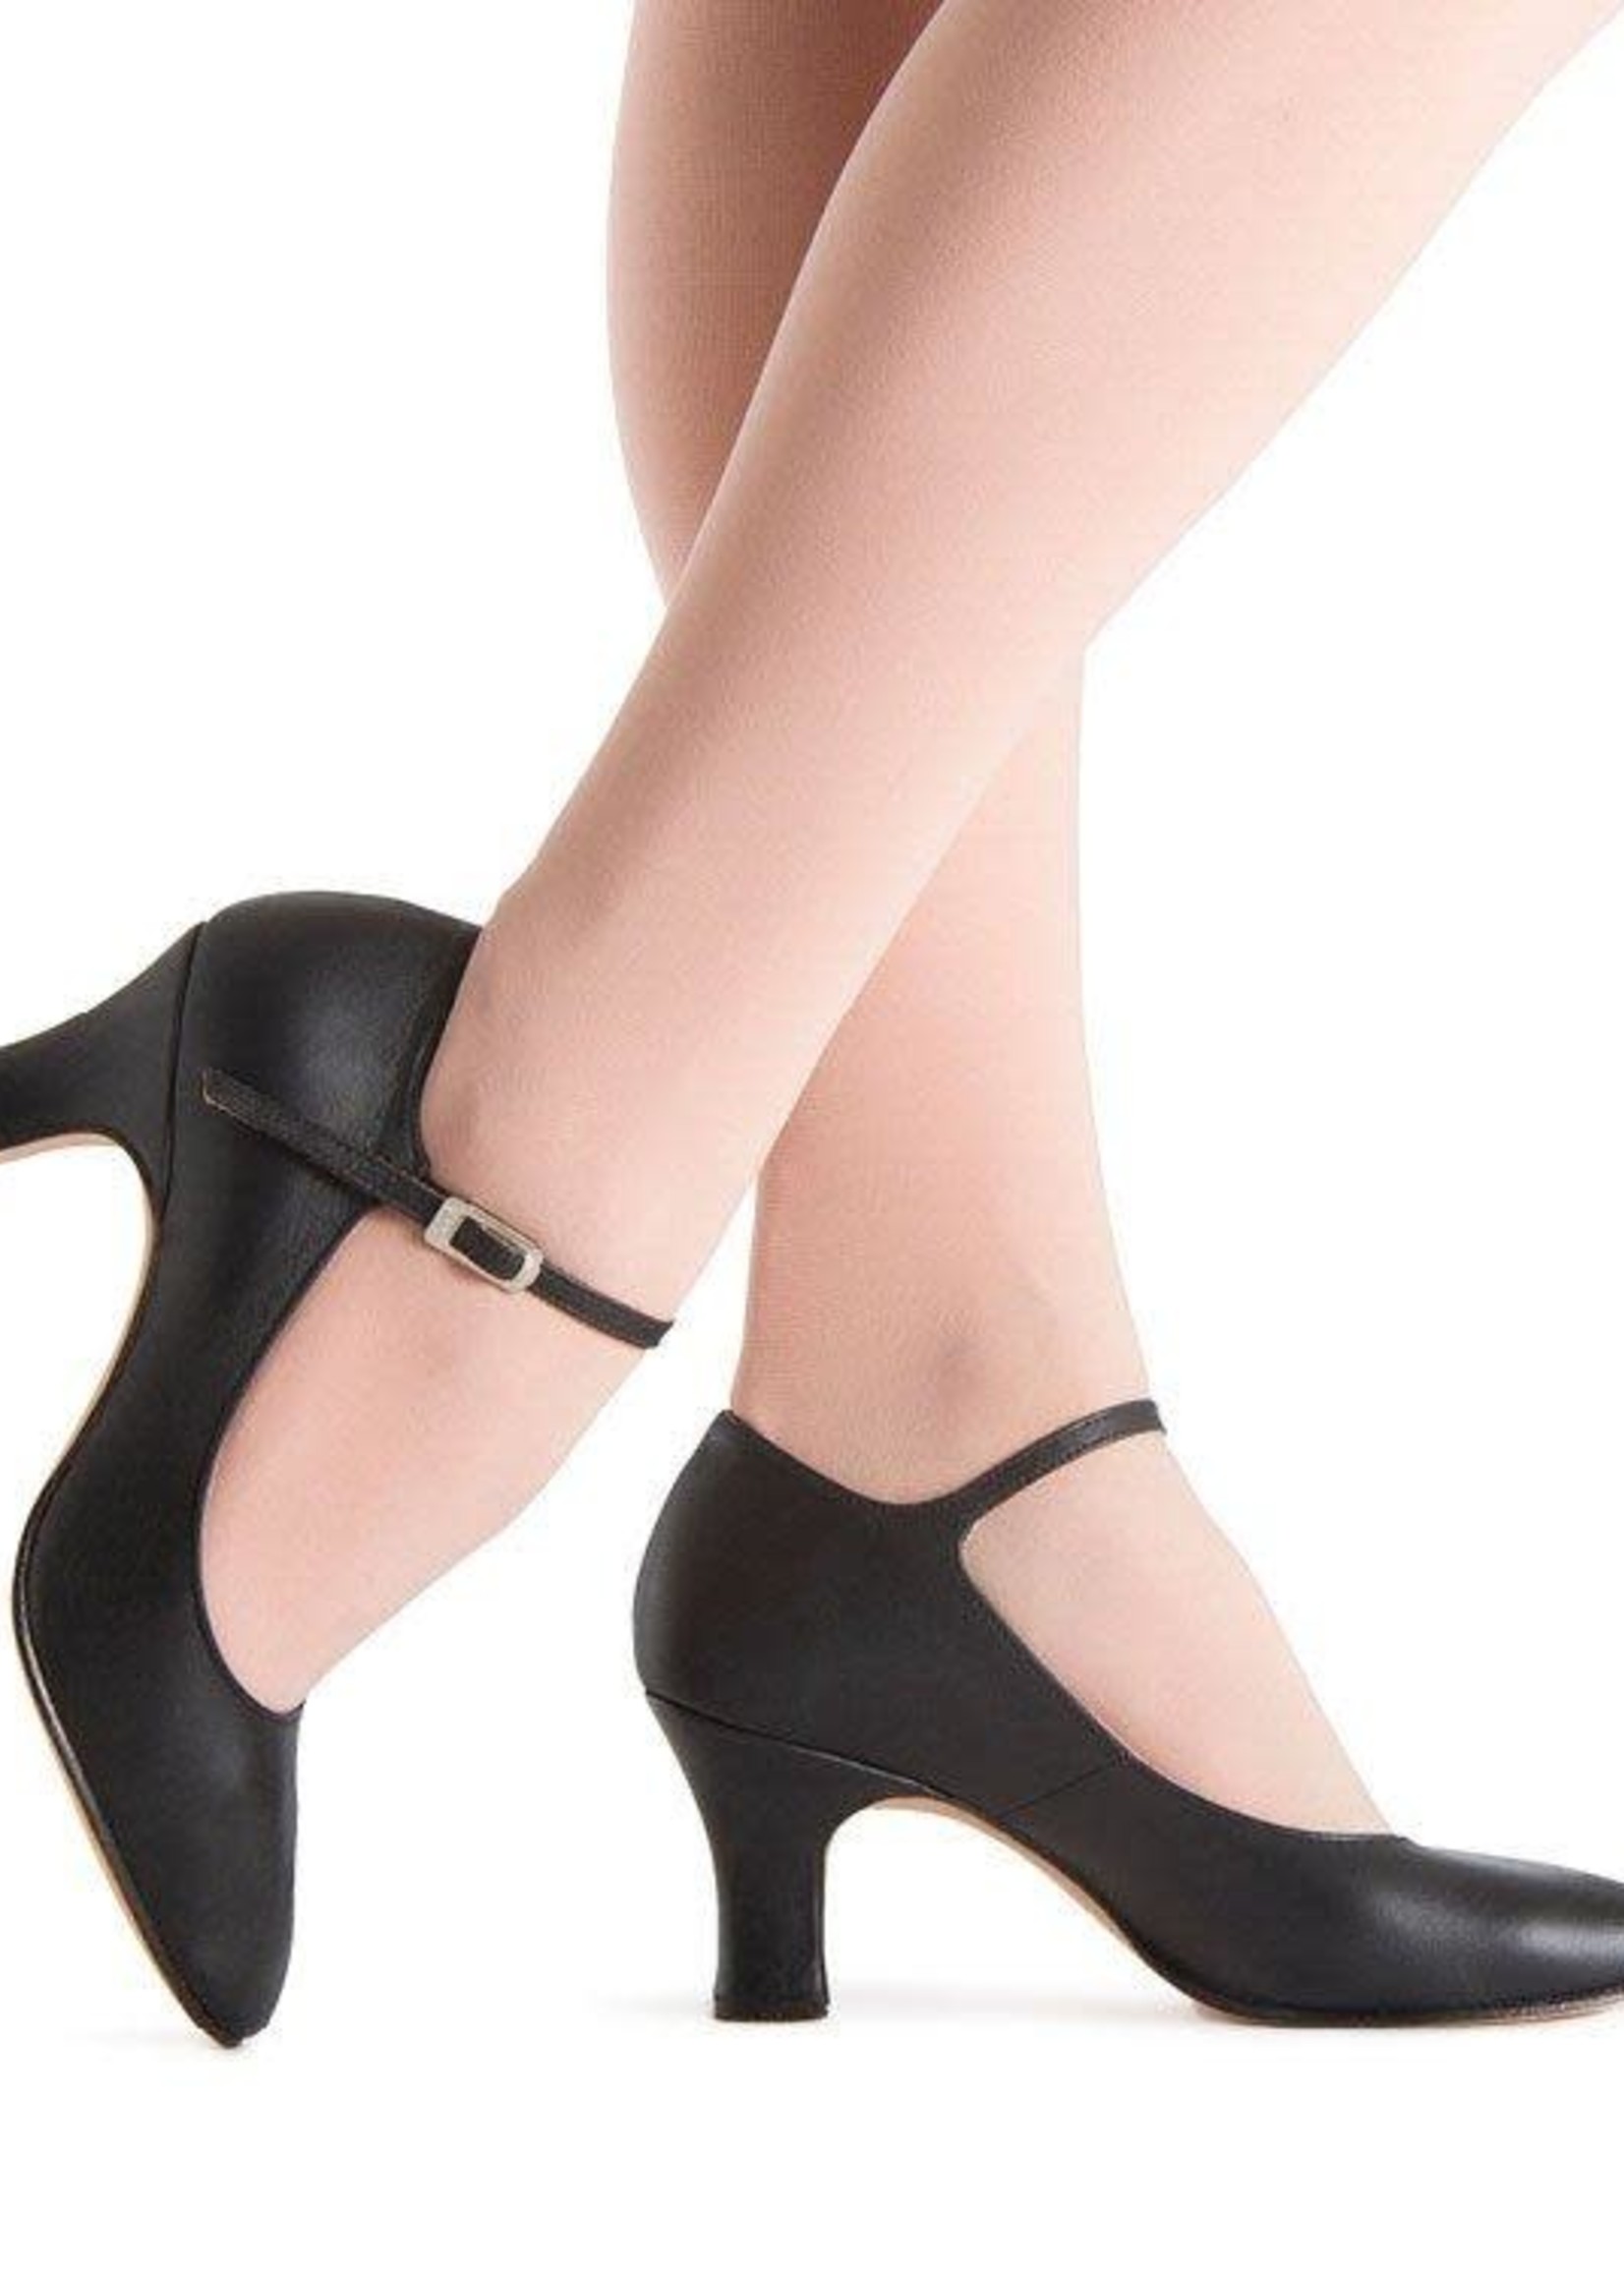 Bloch Chord Ankle Strap 2 1/2" Character Shoe